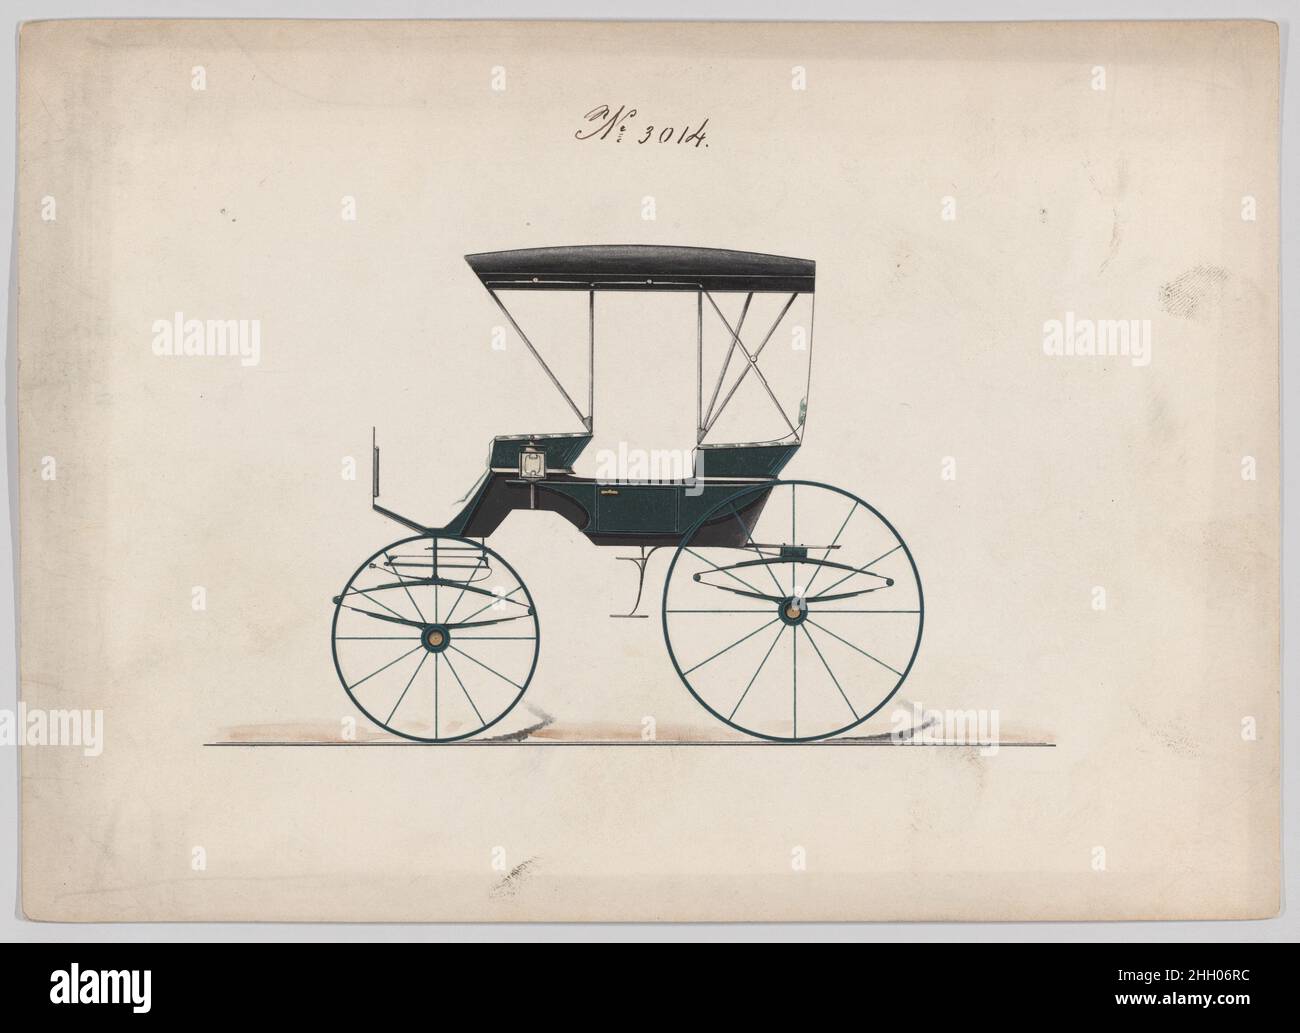 Design for Park Phaeton, no. 3014 1874 Brewster & Co. American Brewster & Company HistoryEstablished in 1810 by James Brewster (1788–1866) in New Haven, Connecticut, Brewster & Company, specialized in the manufacture of fine carriages. The founder opened a New York showroom in 1827 at 53-54 Broad Street, and the company flourished under generations of family leadership. Expansion necessitated moves around lower Manhattan, with name changes reflecting shifts of management–James Brewster & Sons operated at 25 Canal Street, James Brewster Sons at 396 Broadway, and Brewster of Broome Street was ba Stock Photo